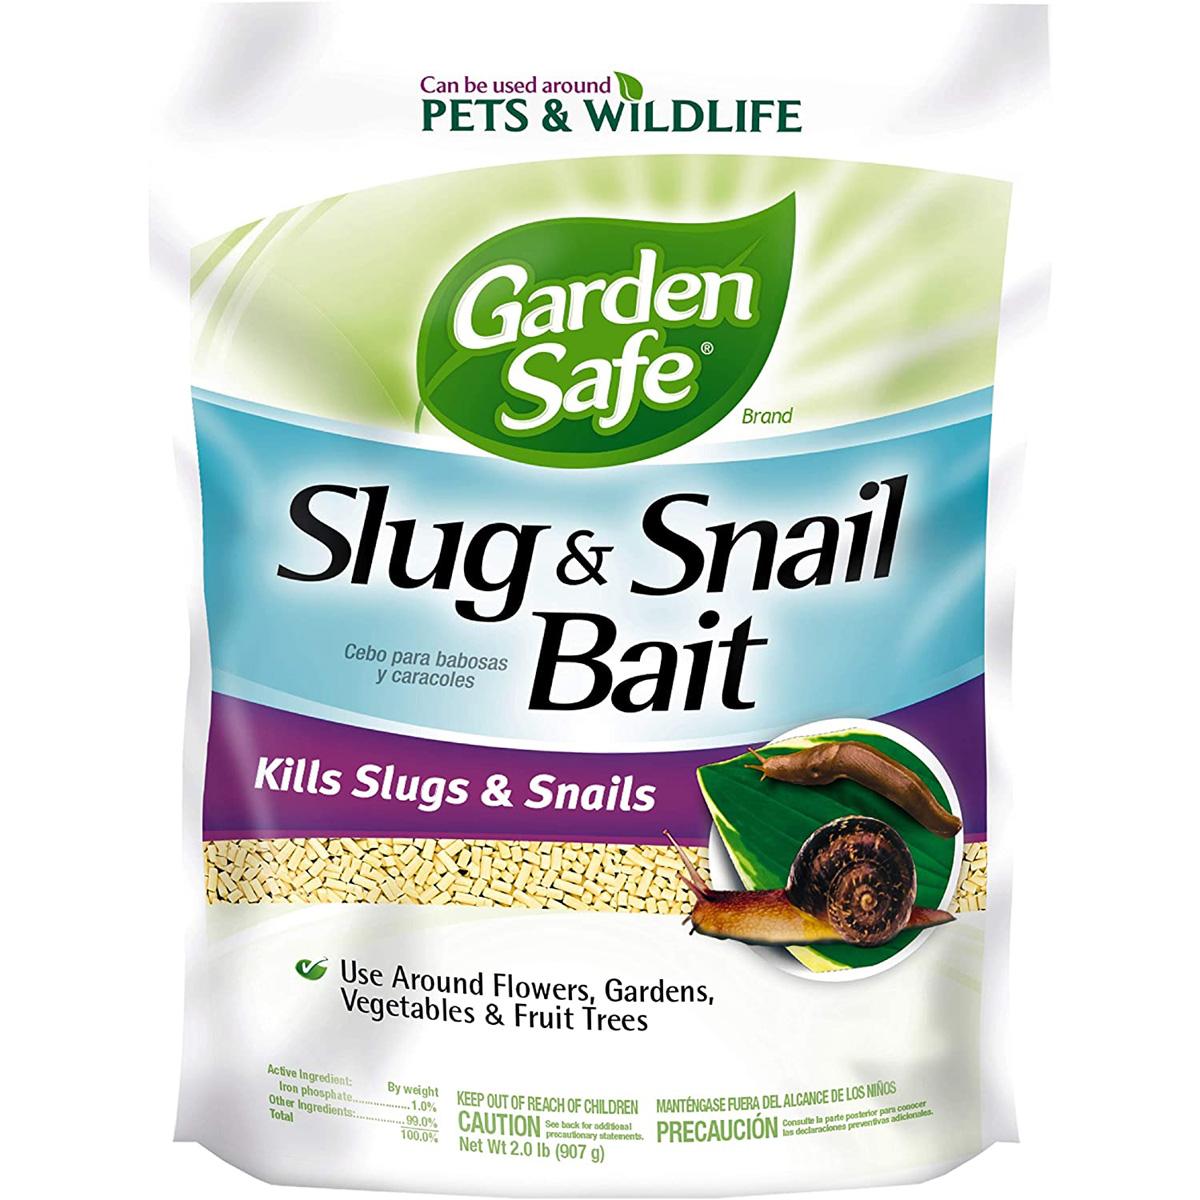 6 Bags of Garden Safe Slug and Snail Bait for $31.99 Shipped